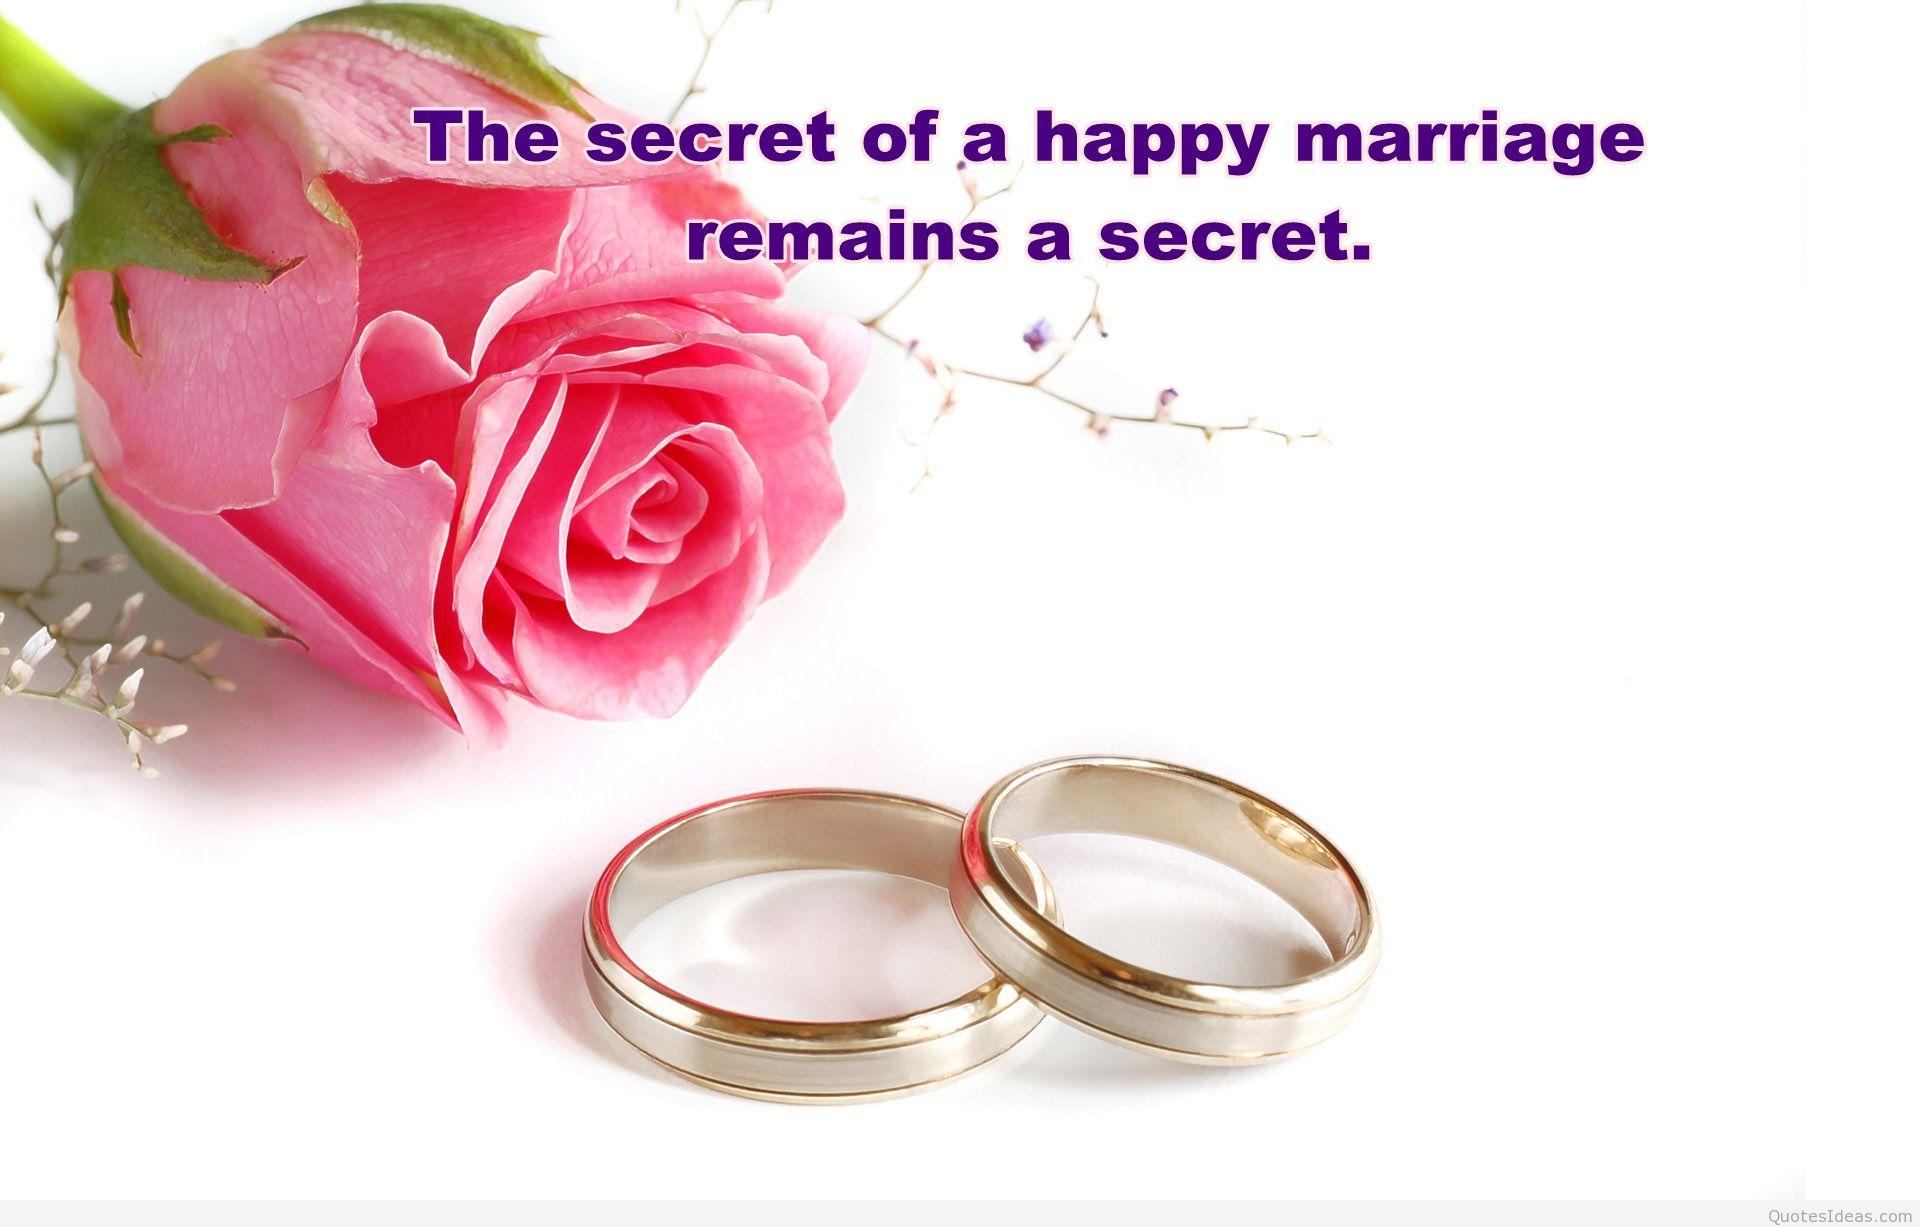 Marriage quotes pics and wallpaper hd